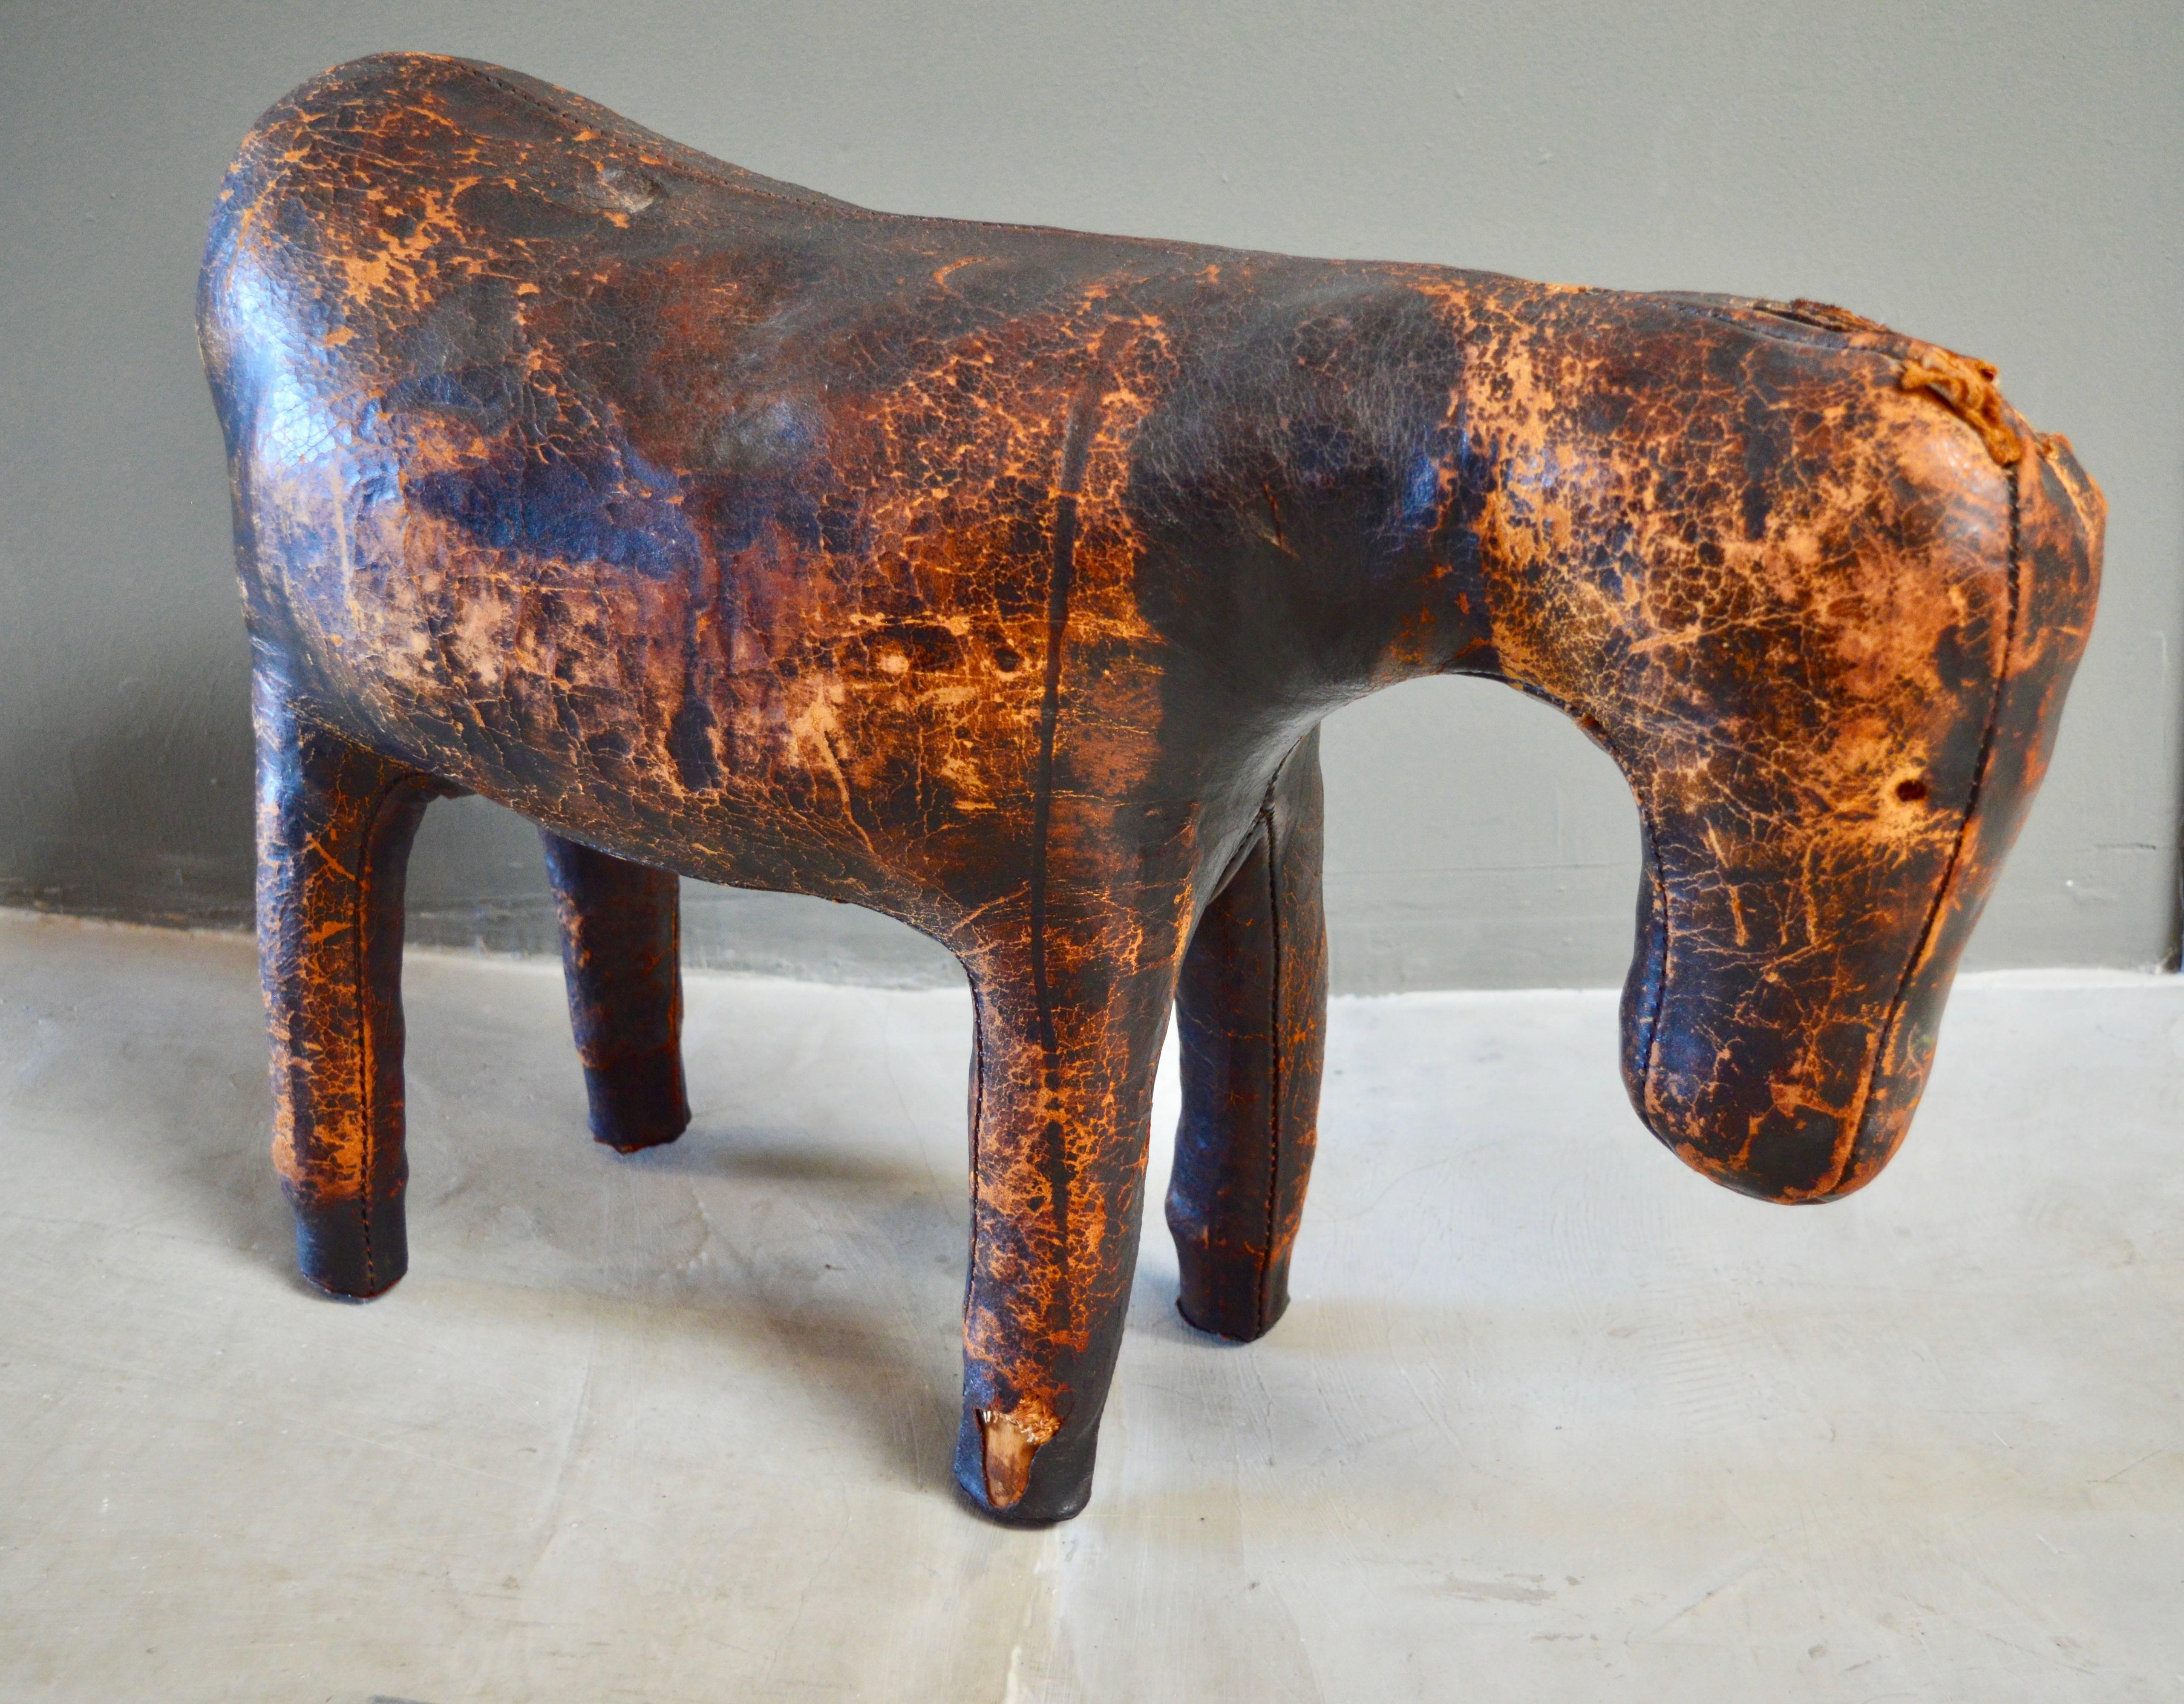 Classic leather donkey by Omersa. Definitely a very early model. Missing eyes and ears and tail. Great looking age and patina. Perfect stool, ottoman or sculptural accessory.